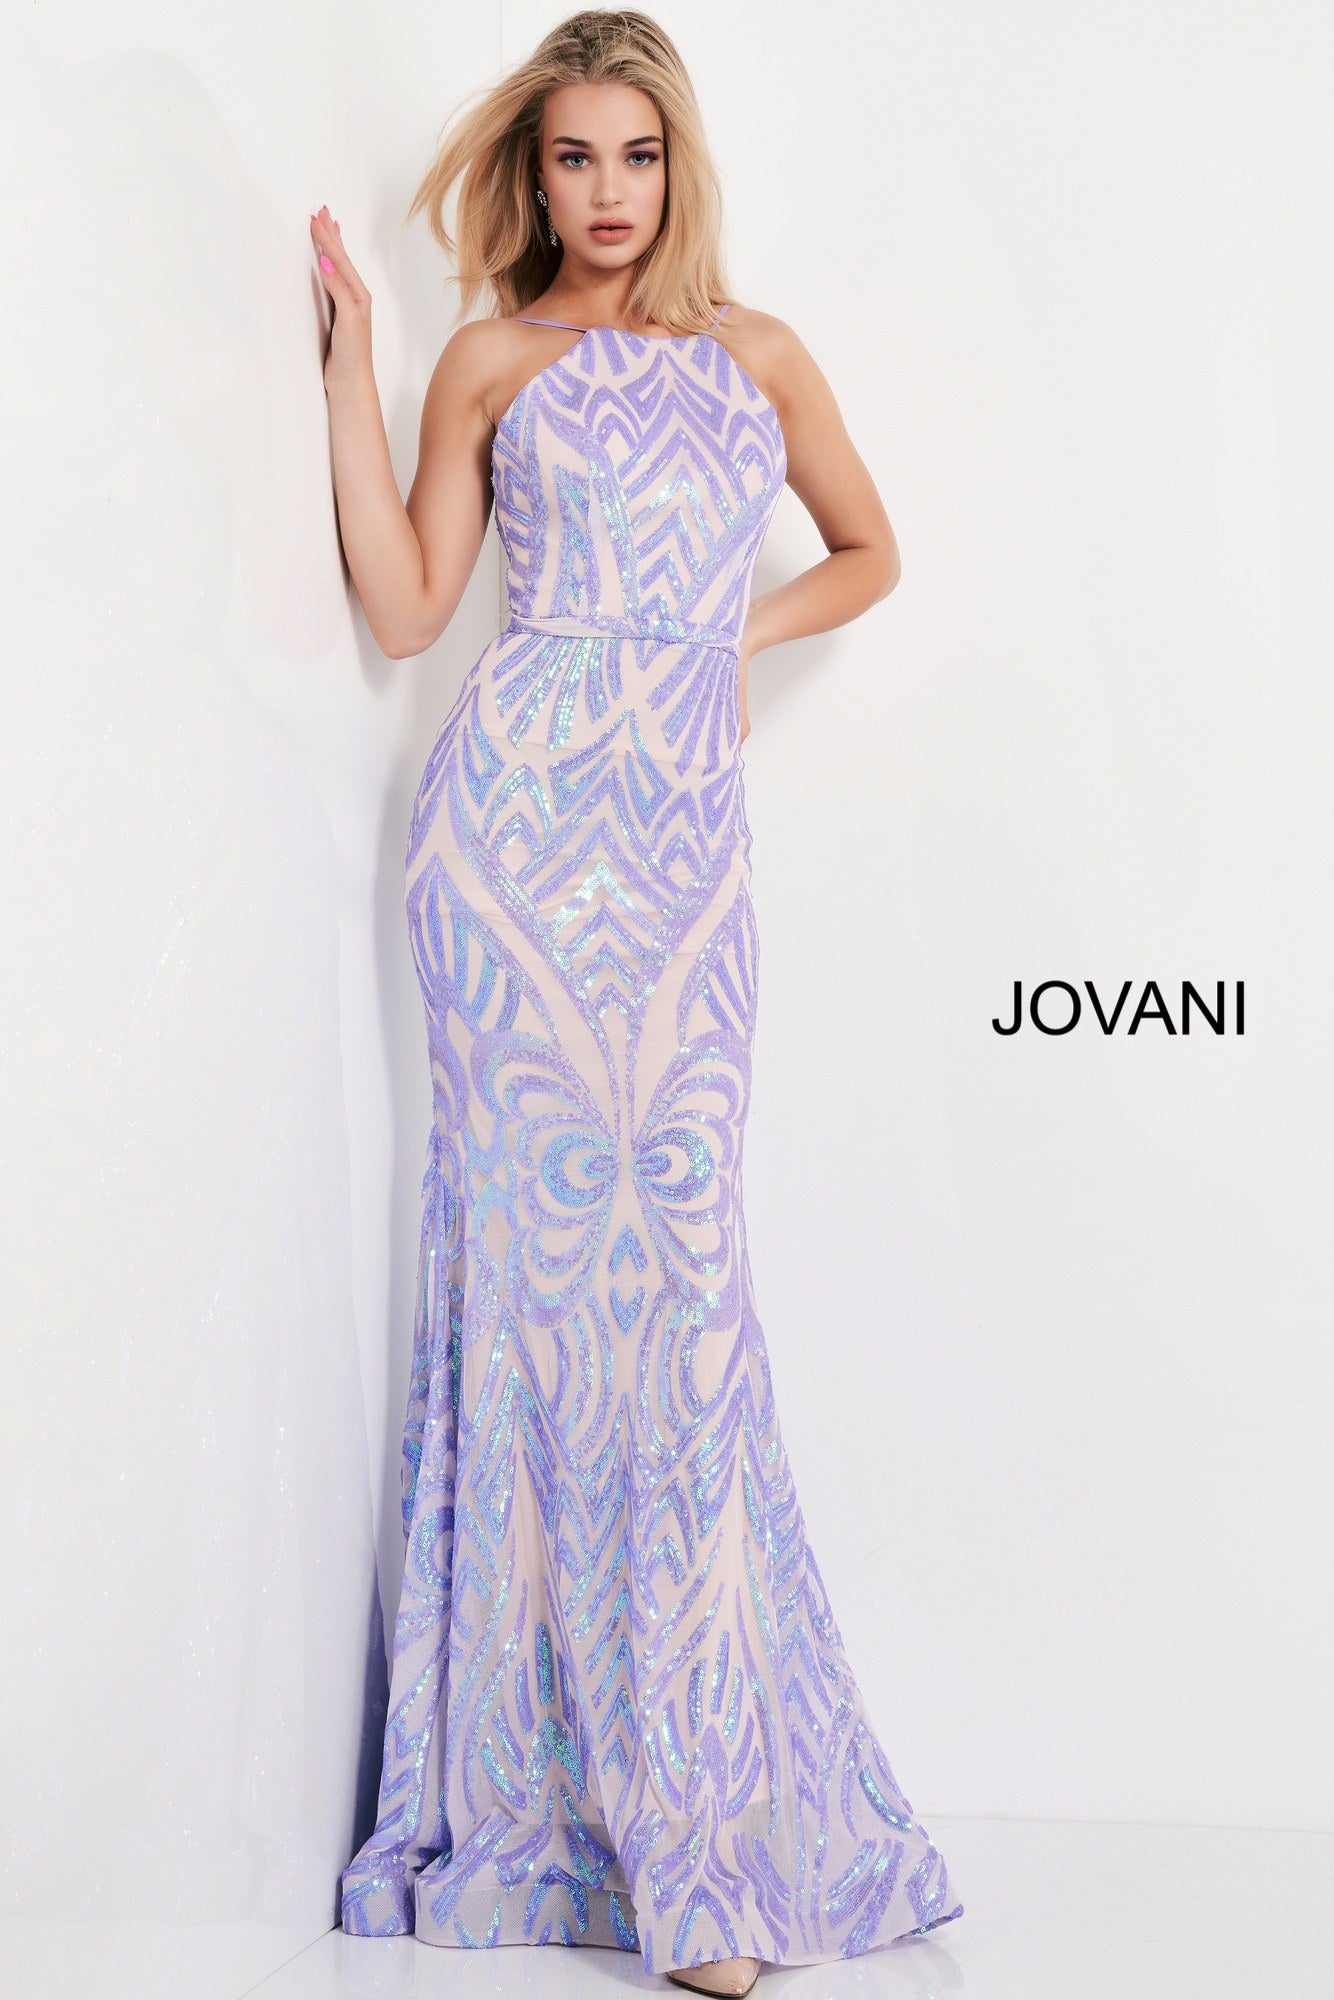 Jovani 03446 This is a long fit and flare prom dress with a high neckline and backless design.  It has a beaded sequins pattern throughout.  Lilac  Size 12